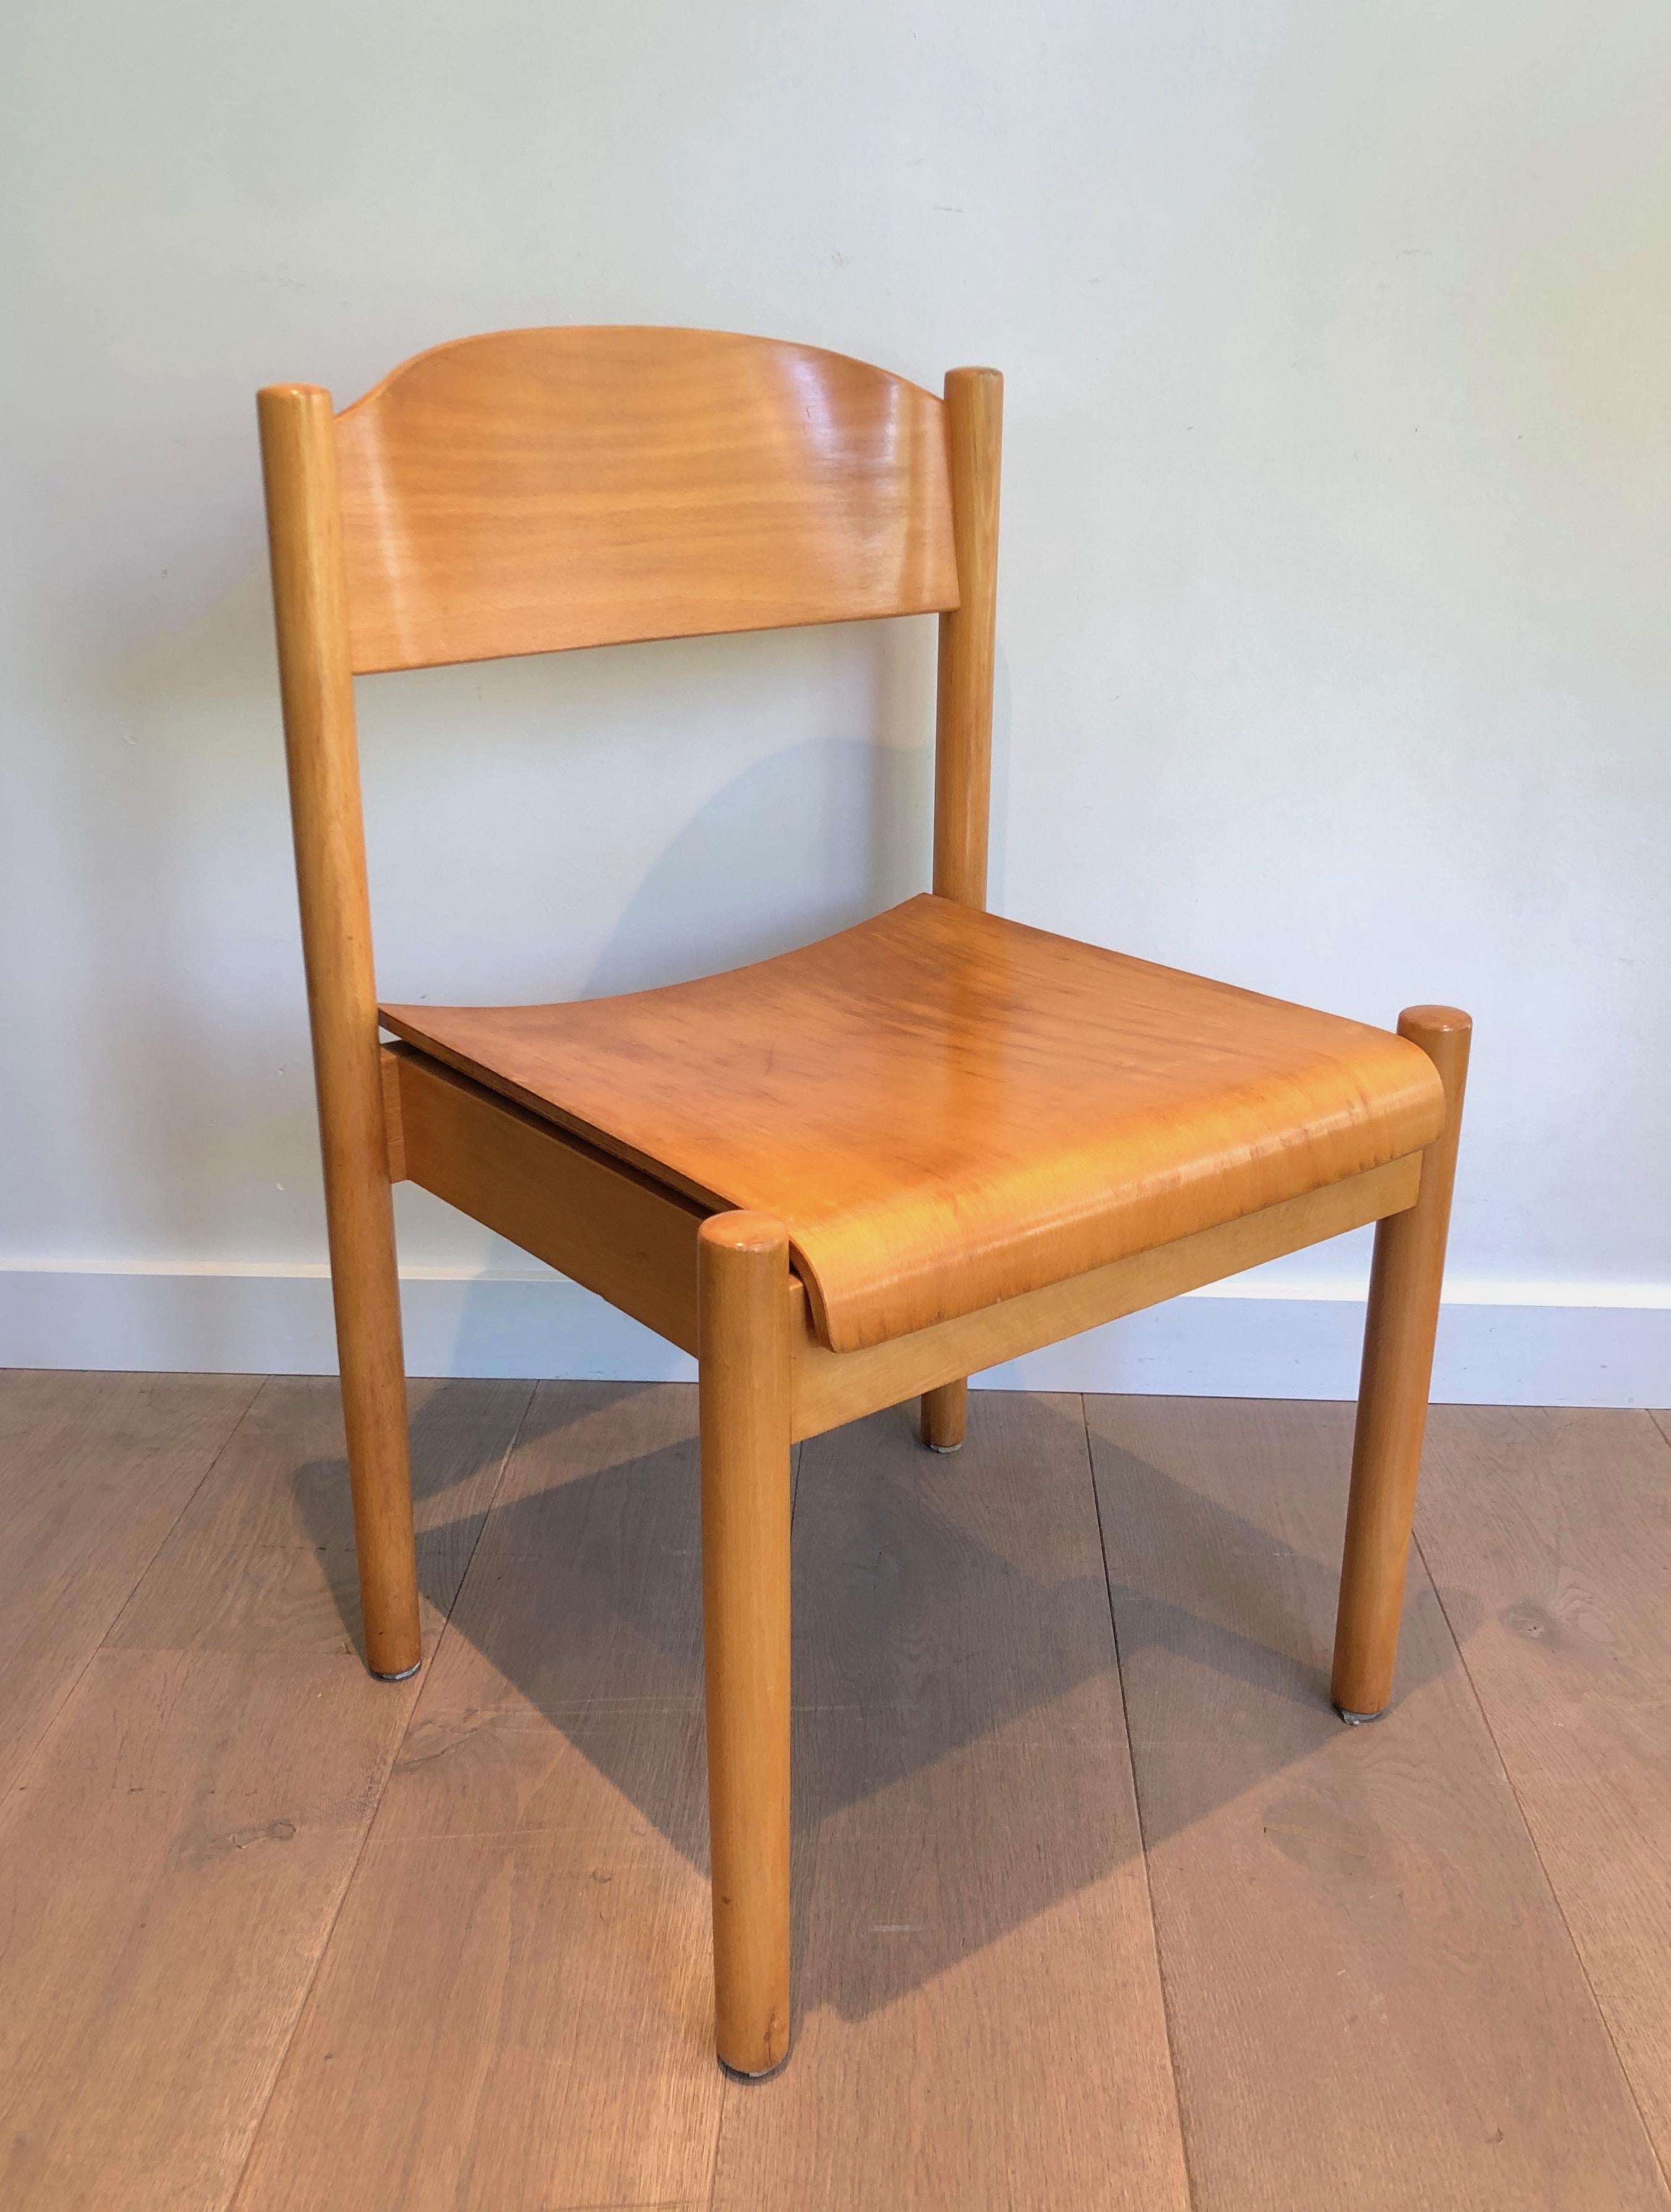 Set of 6 Stackable Pine Chairs, German Work by Karl Klipper, Circa 1970 For Sale 1